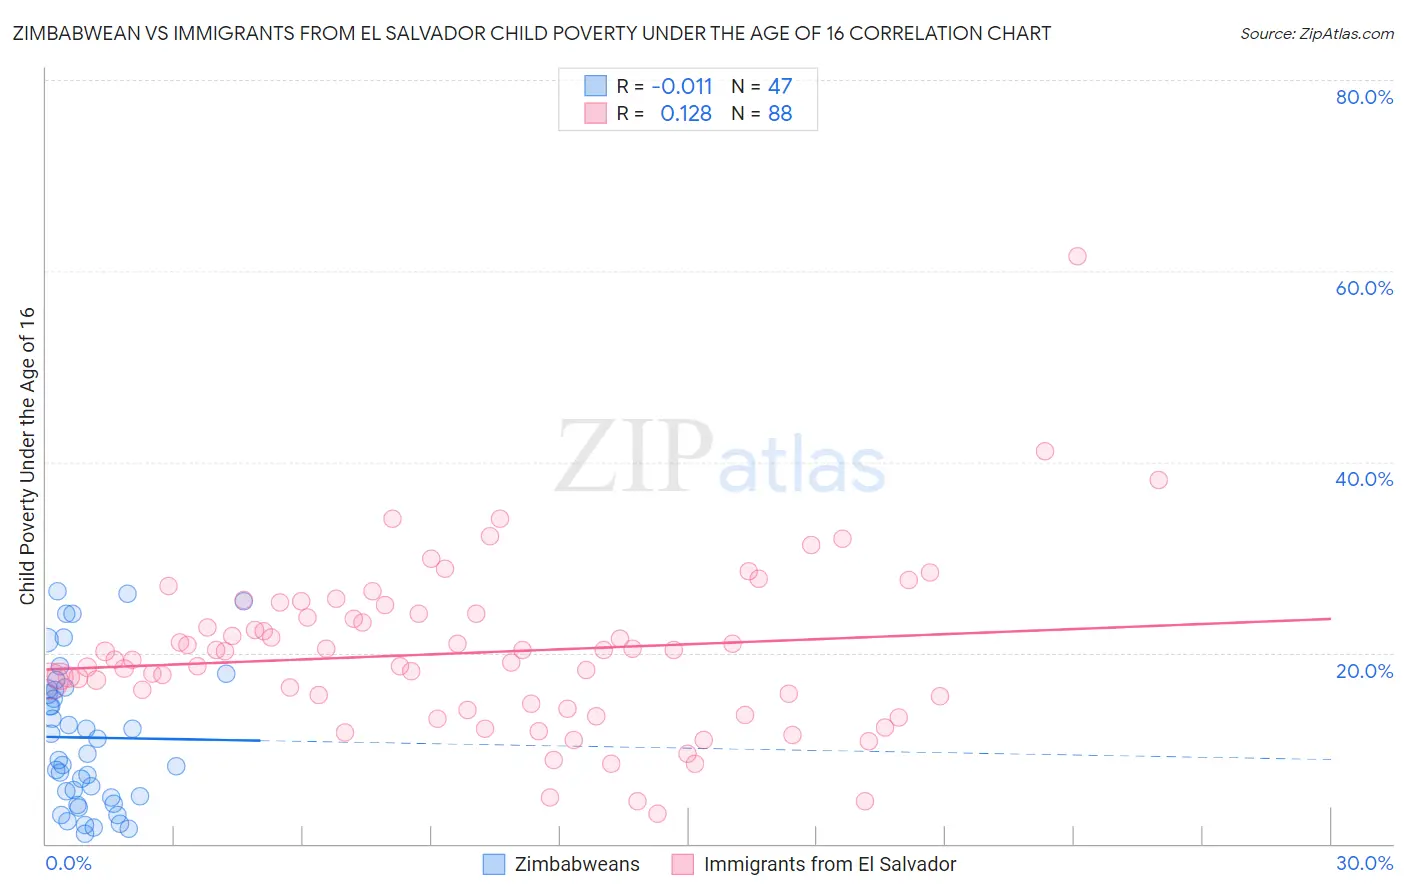 Zimbabwean vs Immigrants from El Salvador Child Poverty Under the Age of 16